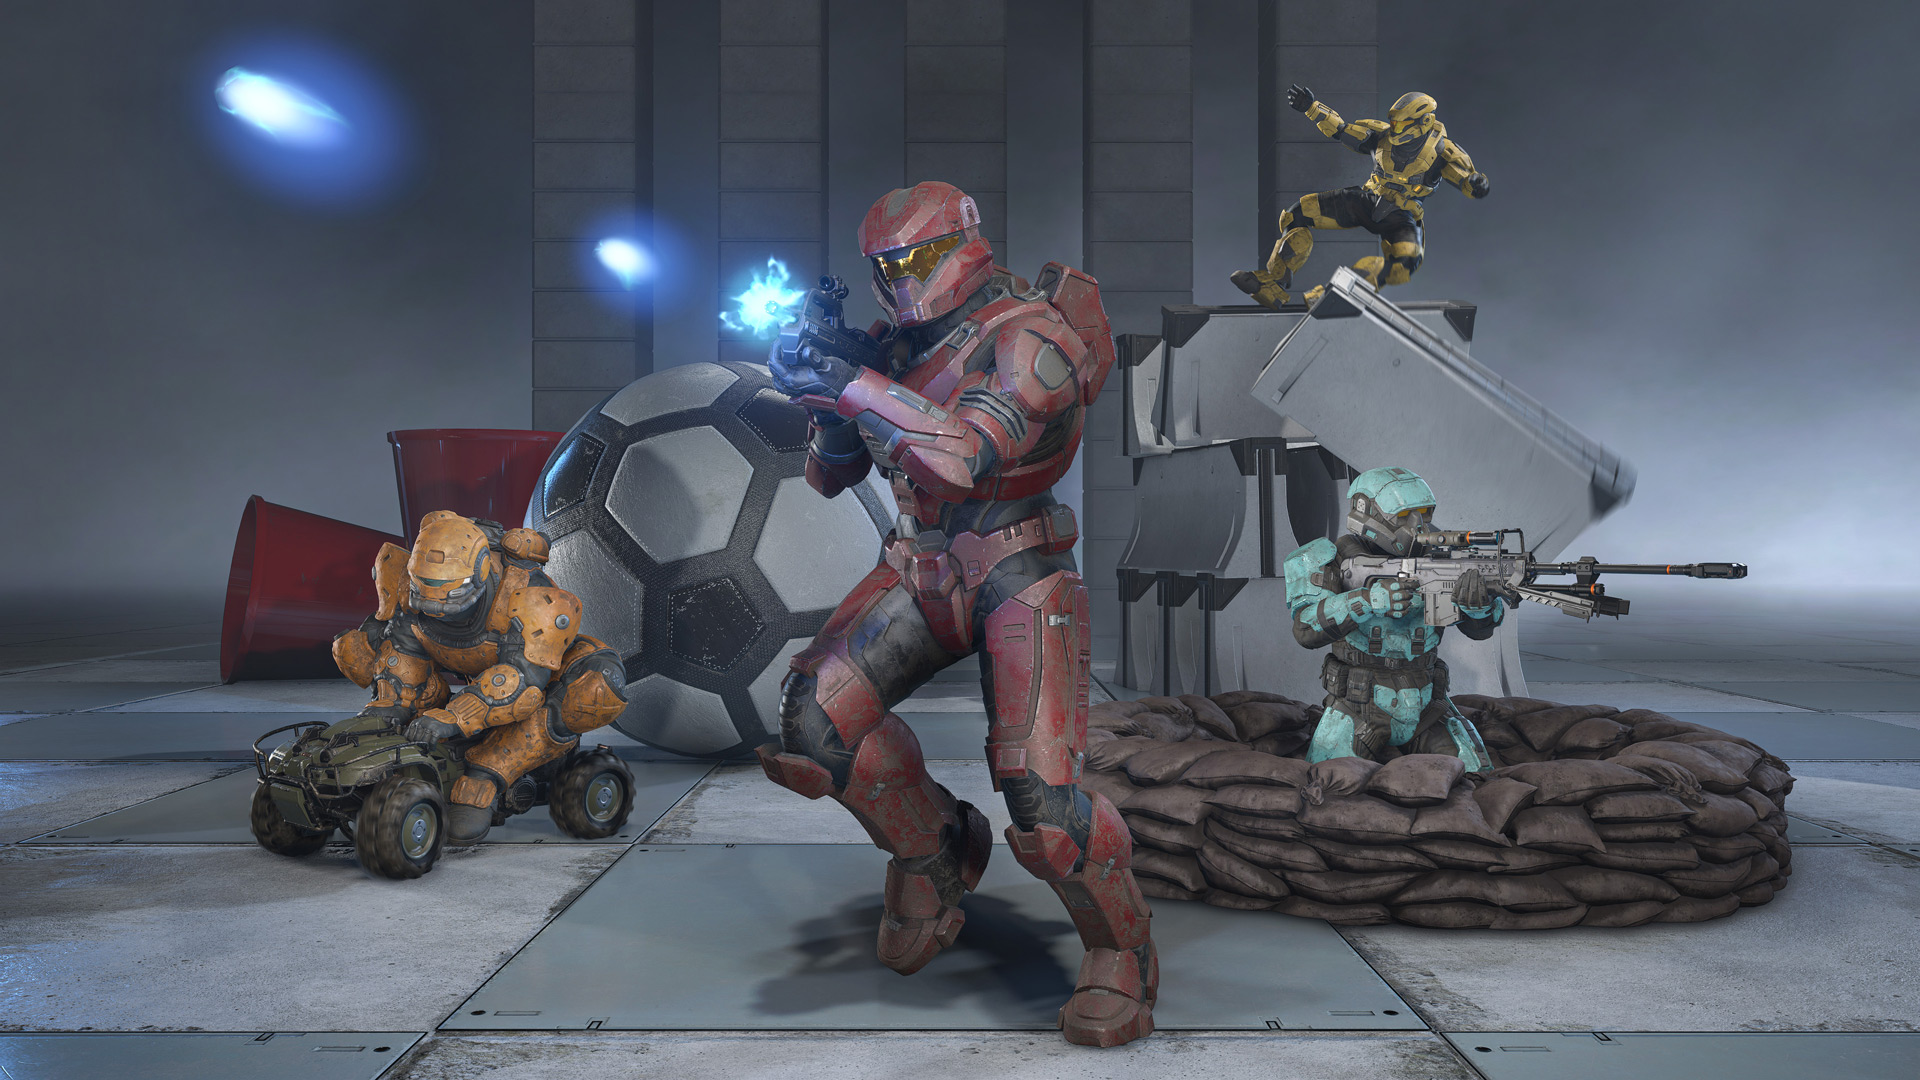 A screenshot showing off Spartans doing silly activities from popular Halo minigames.